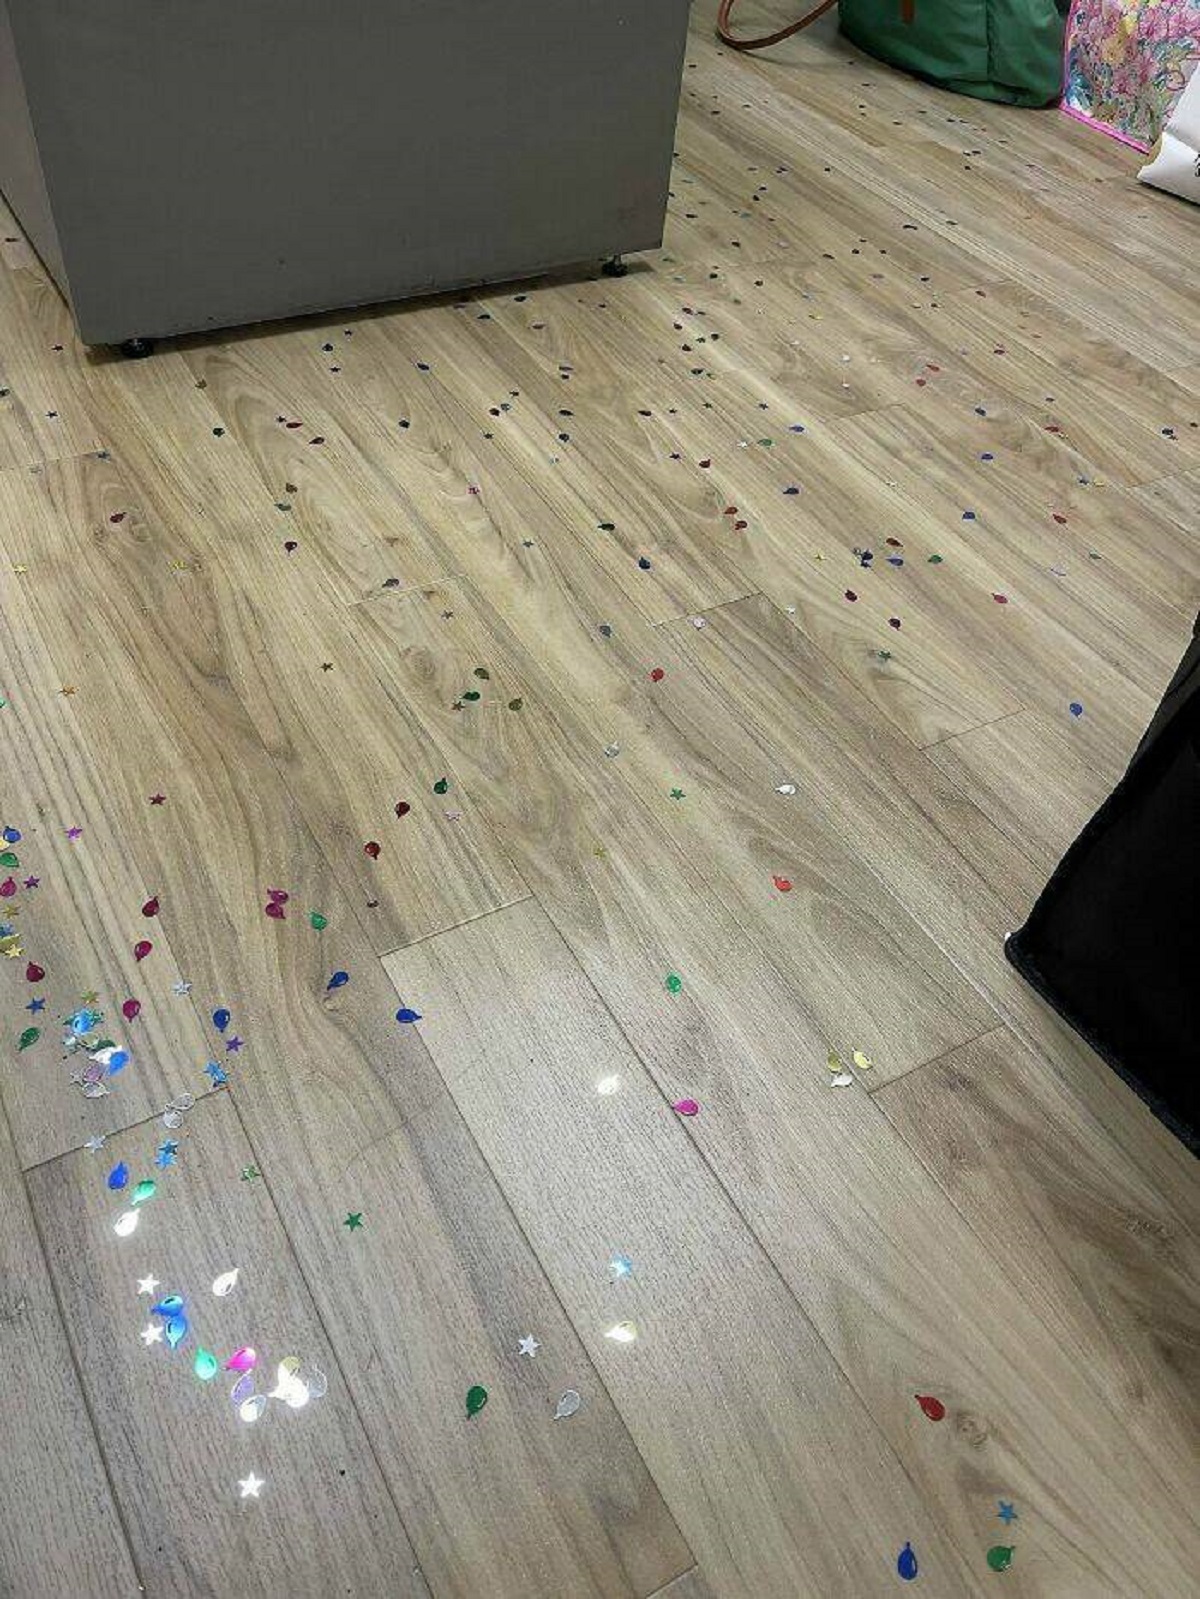 "The People In The Building I Clean Like To Throw Confetti To Celebrate Office Birthdays"